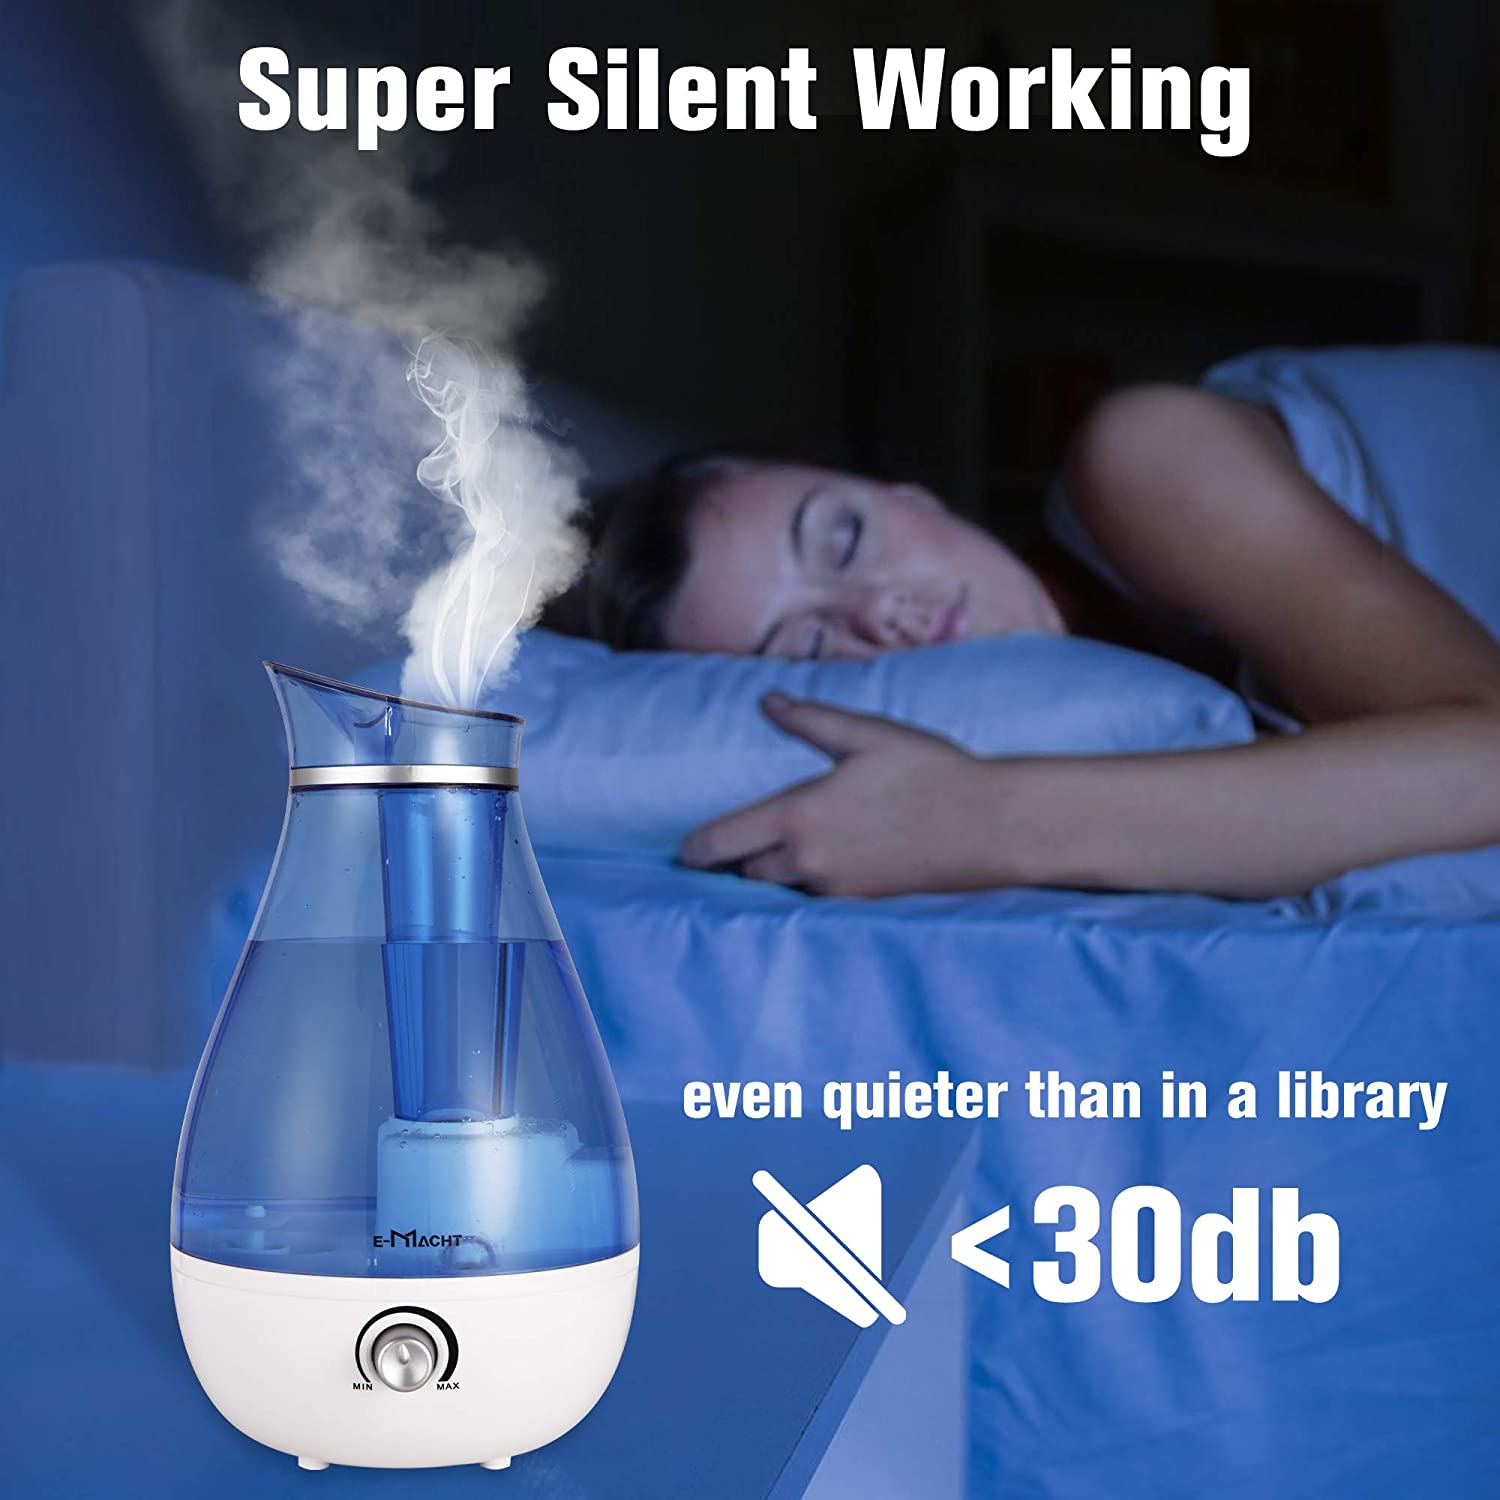 KARMAS PRODUCT Humidifiers for Bedroom Quiet Ultrasonic Cool Mist Humidifier 2.5L with Auto Shut-Off, Night Light and Adjustable Mist Output,Less Than 30dB,Blue - image 5 of 7